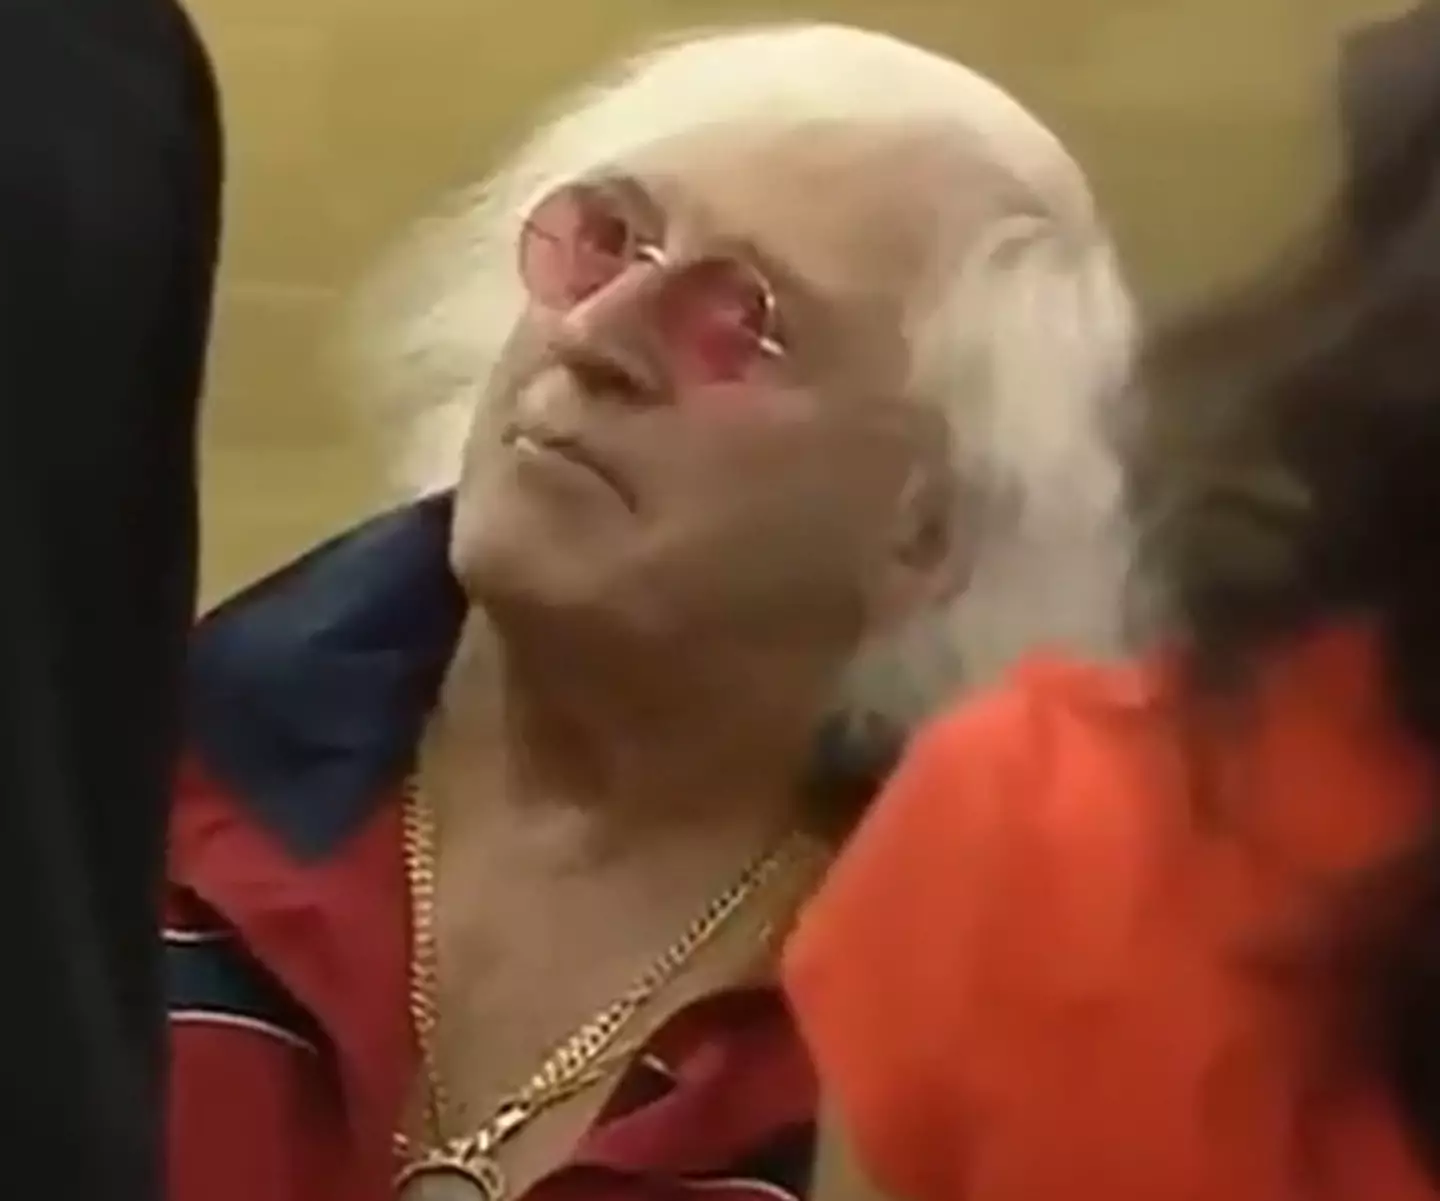 Jimmy Savile appeared on Celebrity Big Brother in 2006.